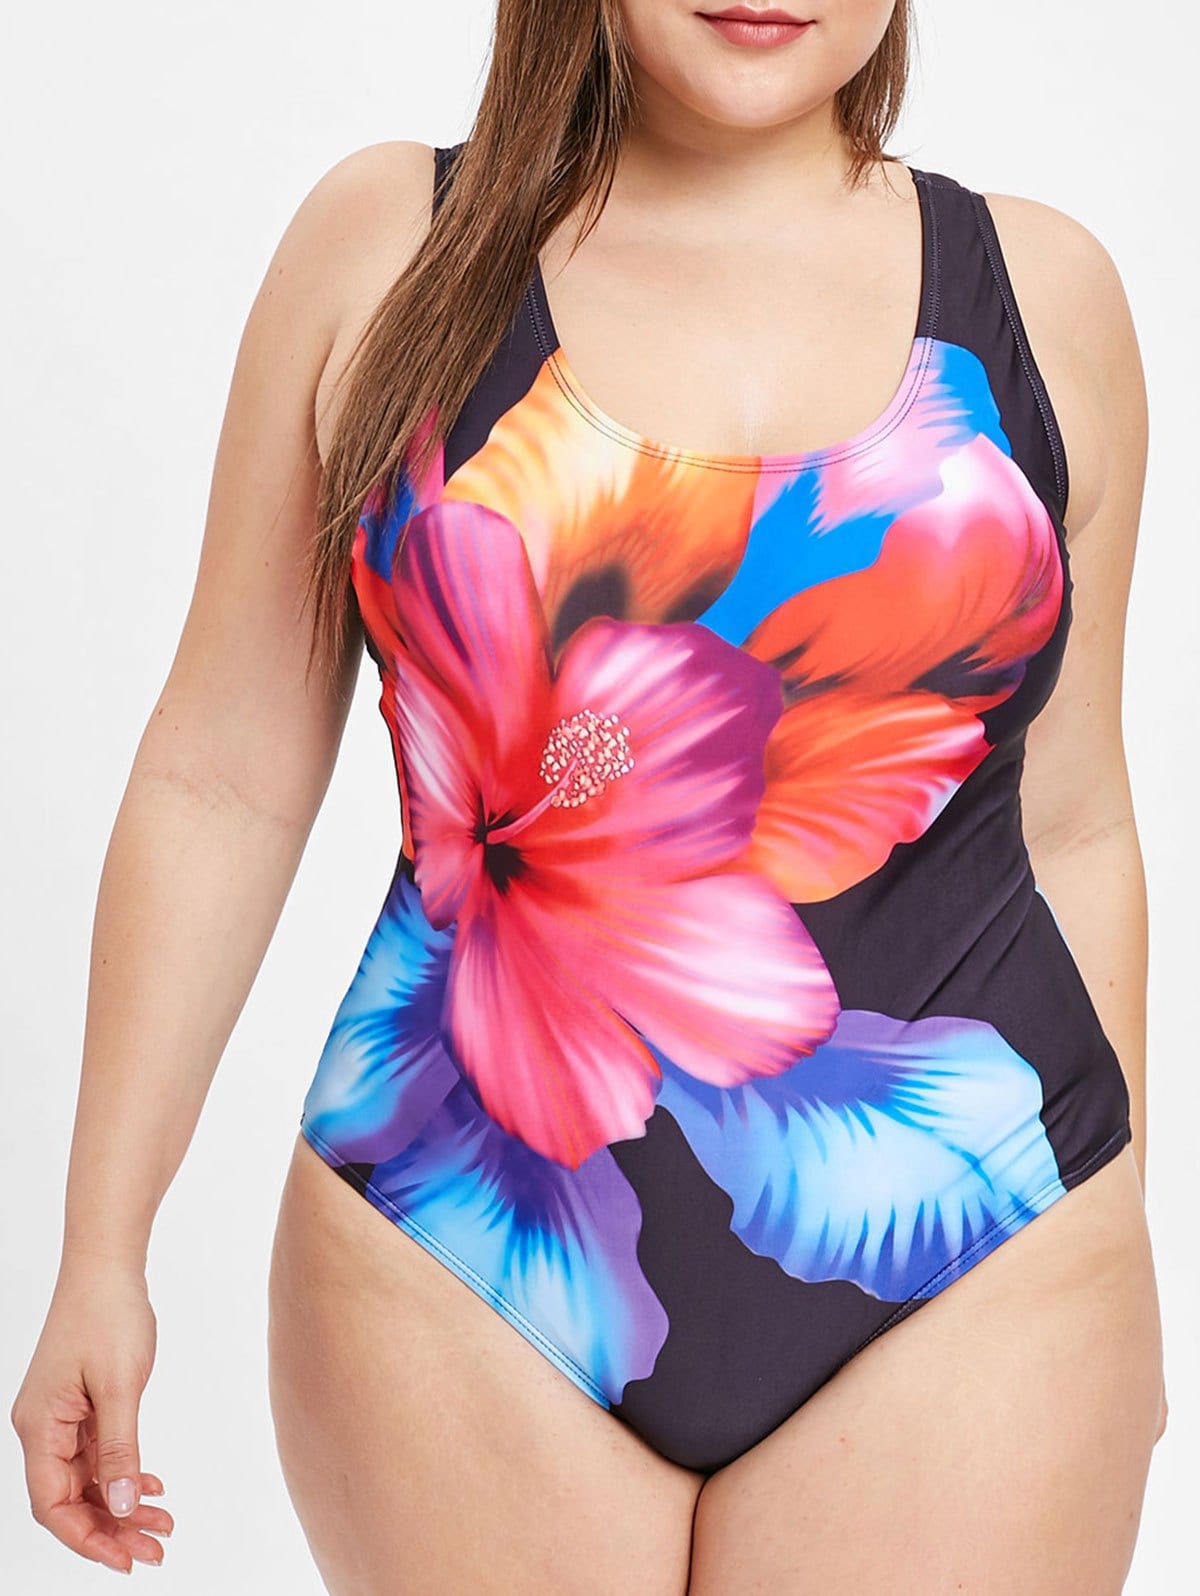 Padded Floral Print Plus Size One Piece Swimsuit